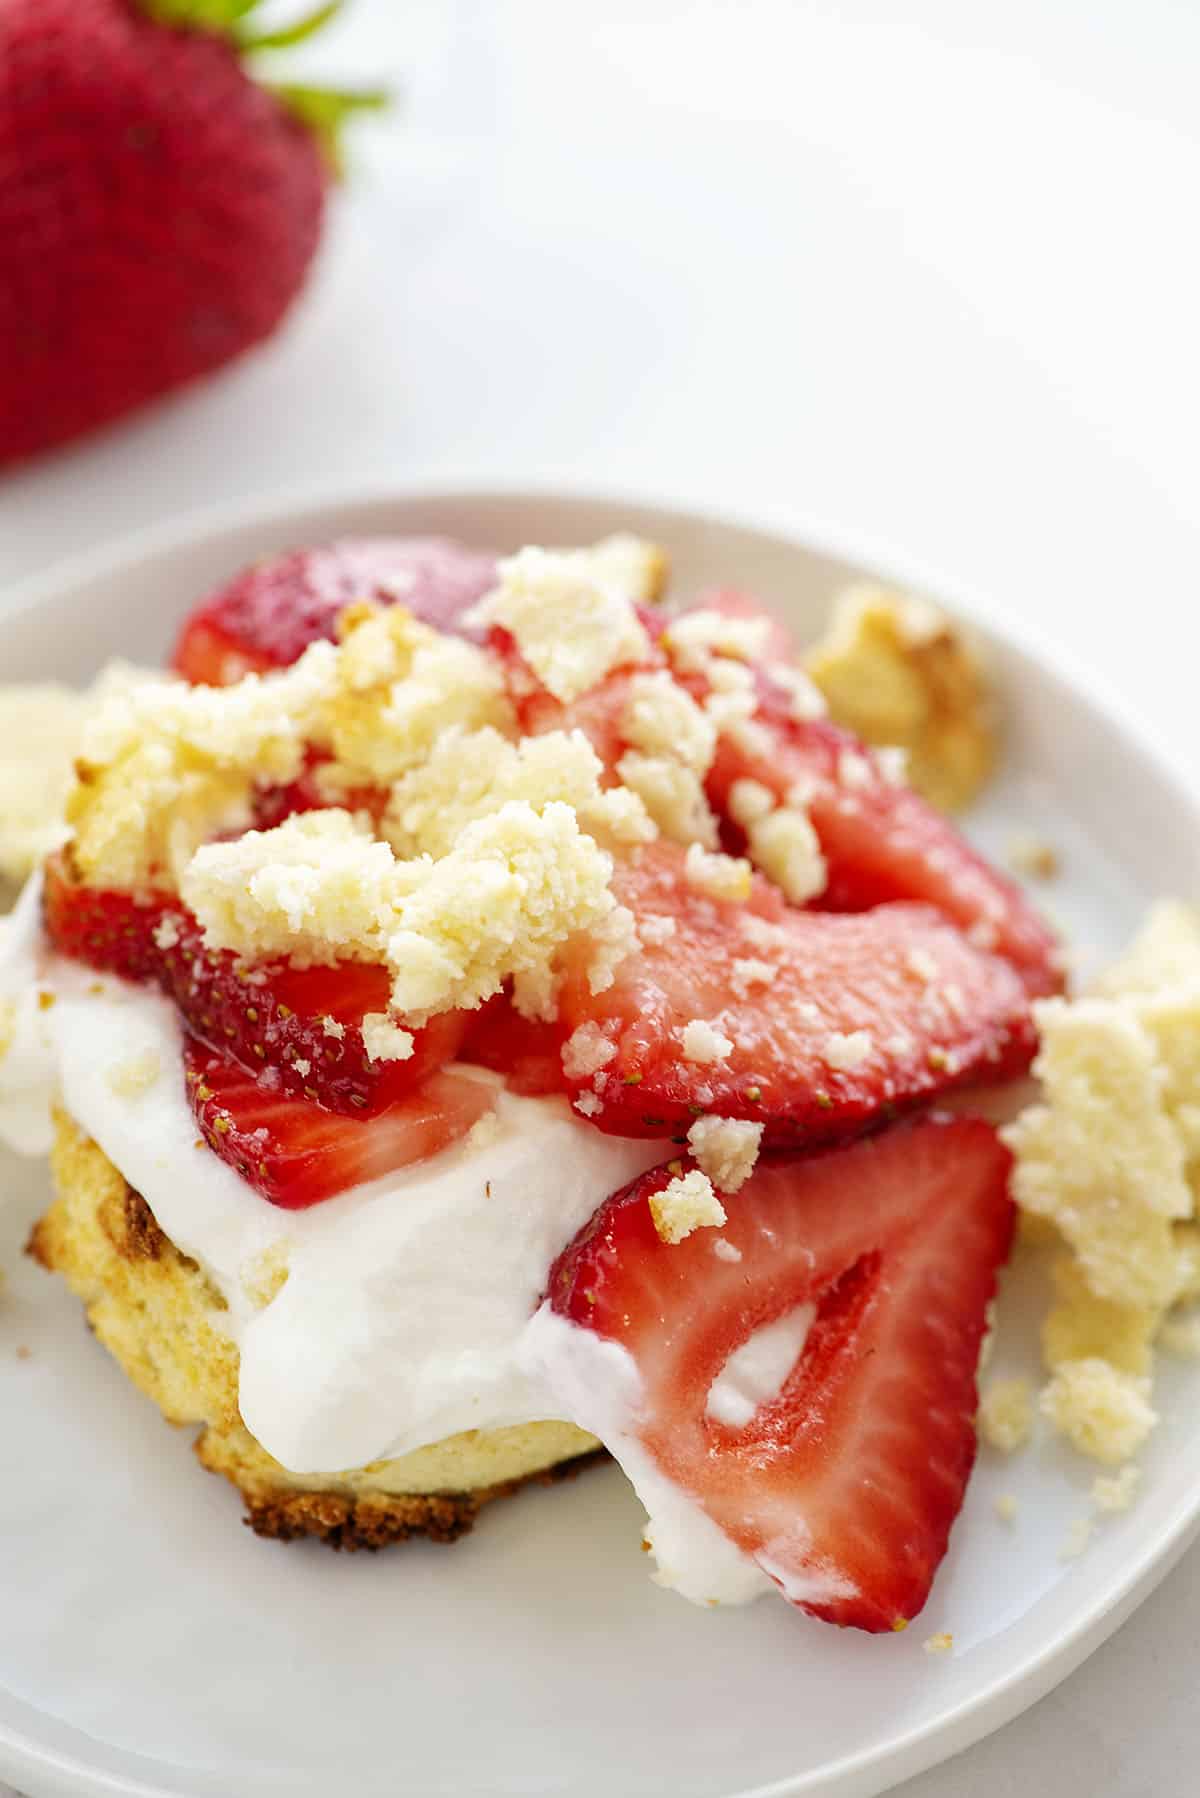 biscuit crumbled on top of strawberry shortcake.